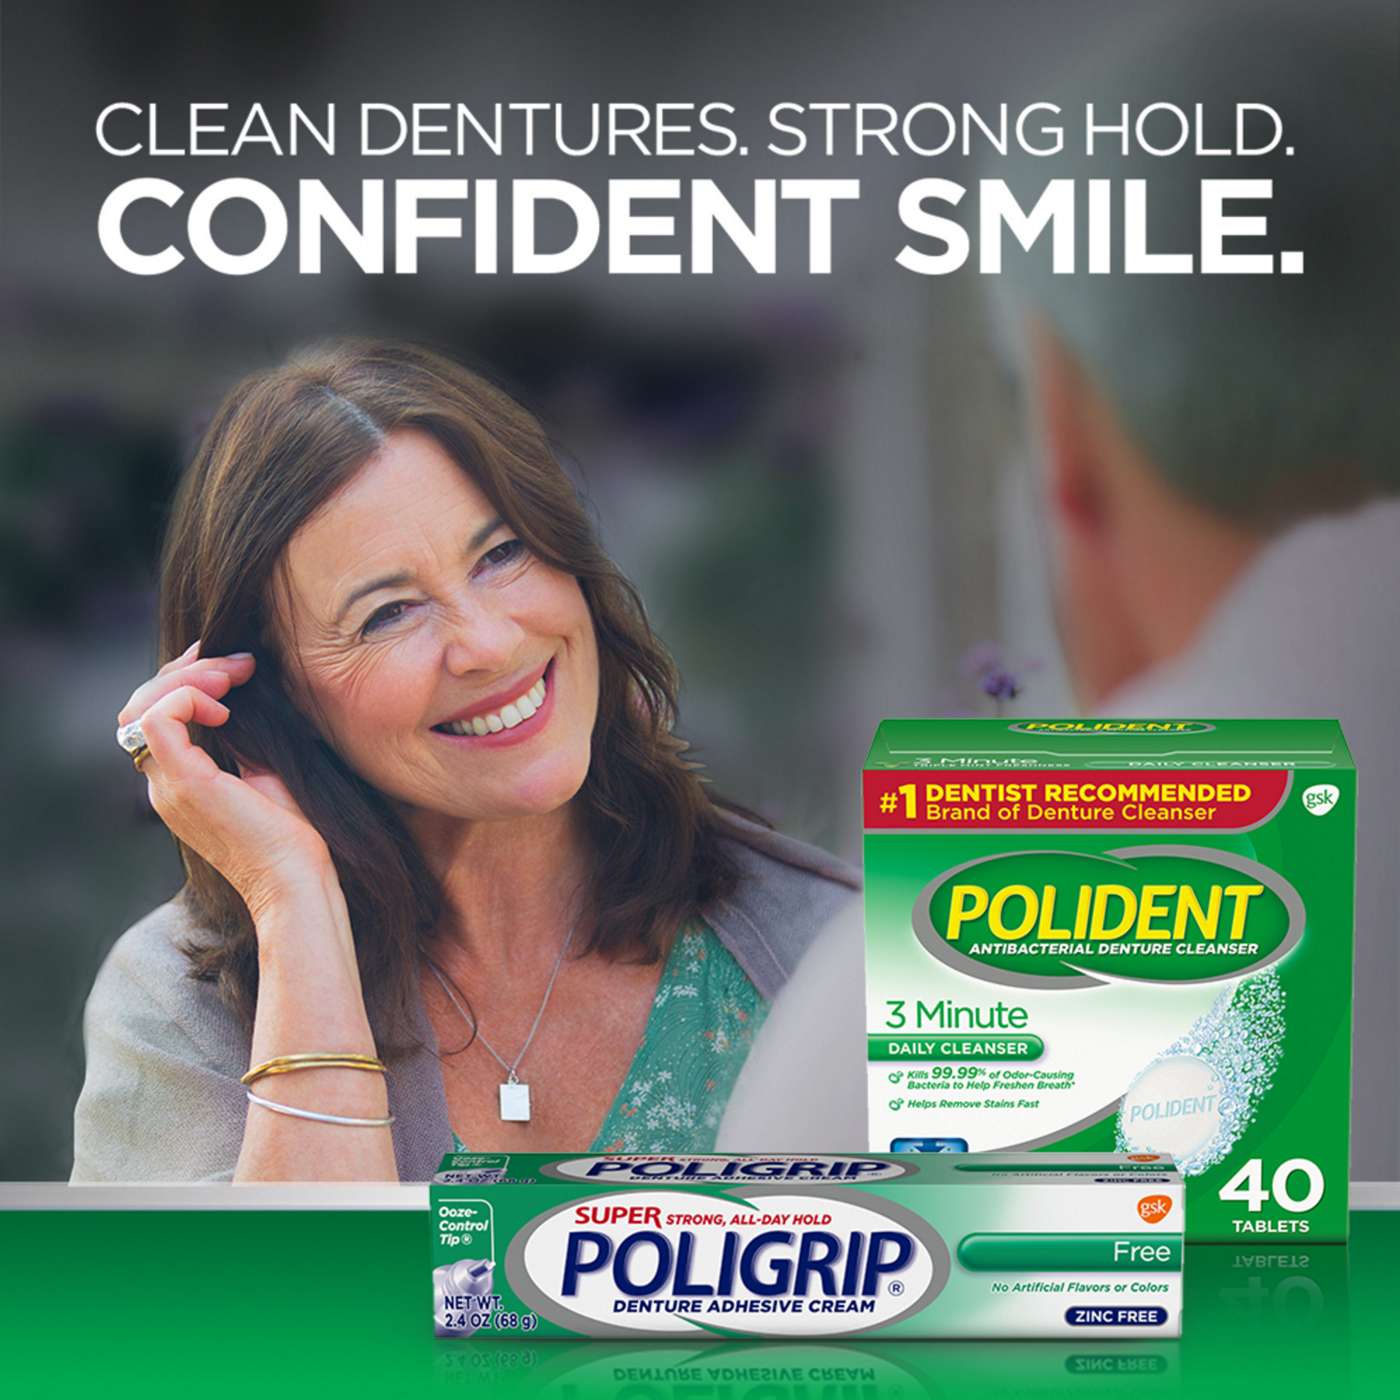 Polident 3 Minute Triple Mint Antibacterial Denture Cleanser Effervescent Tablets; image 4 of 8